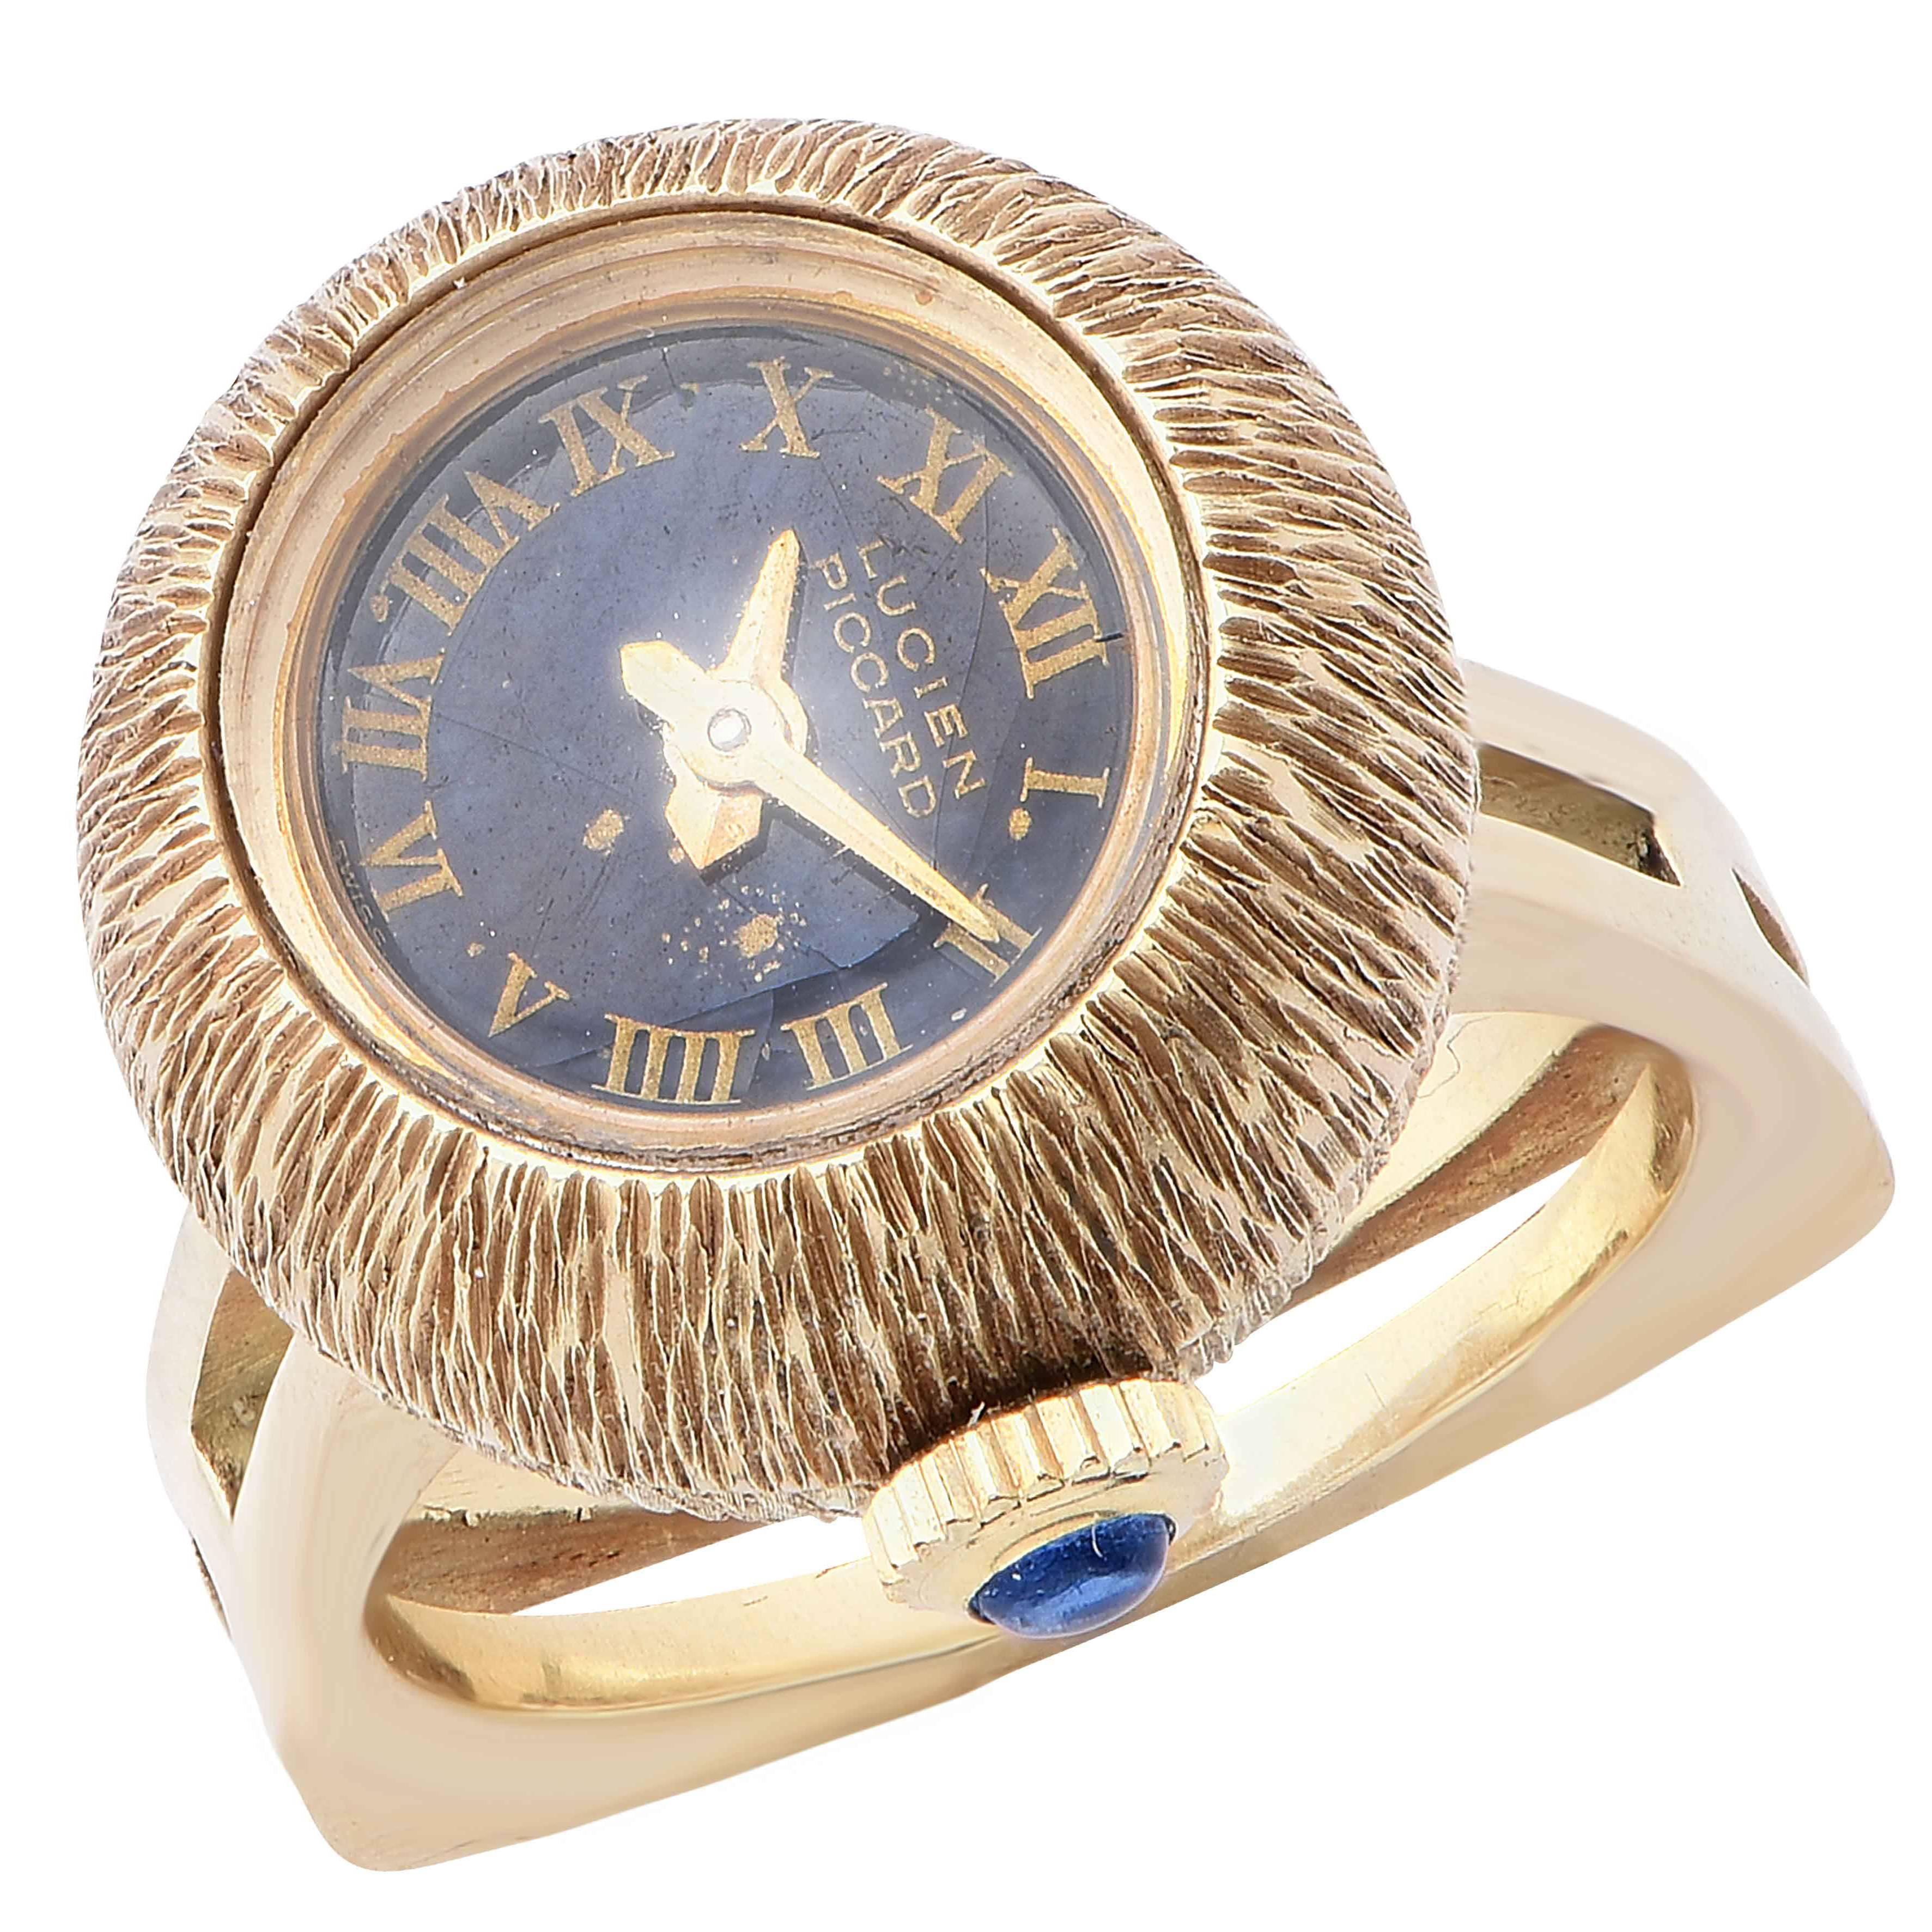 Lucien Picard Ladies Yellow Gold Manual Wind Ring Watch